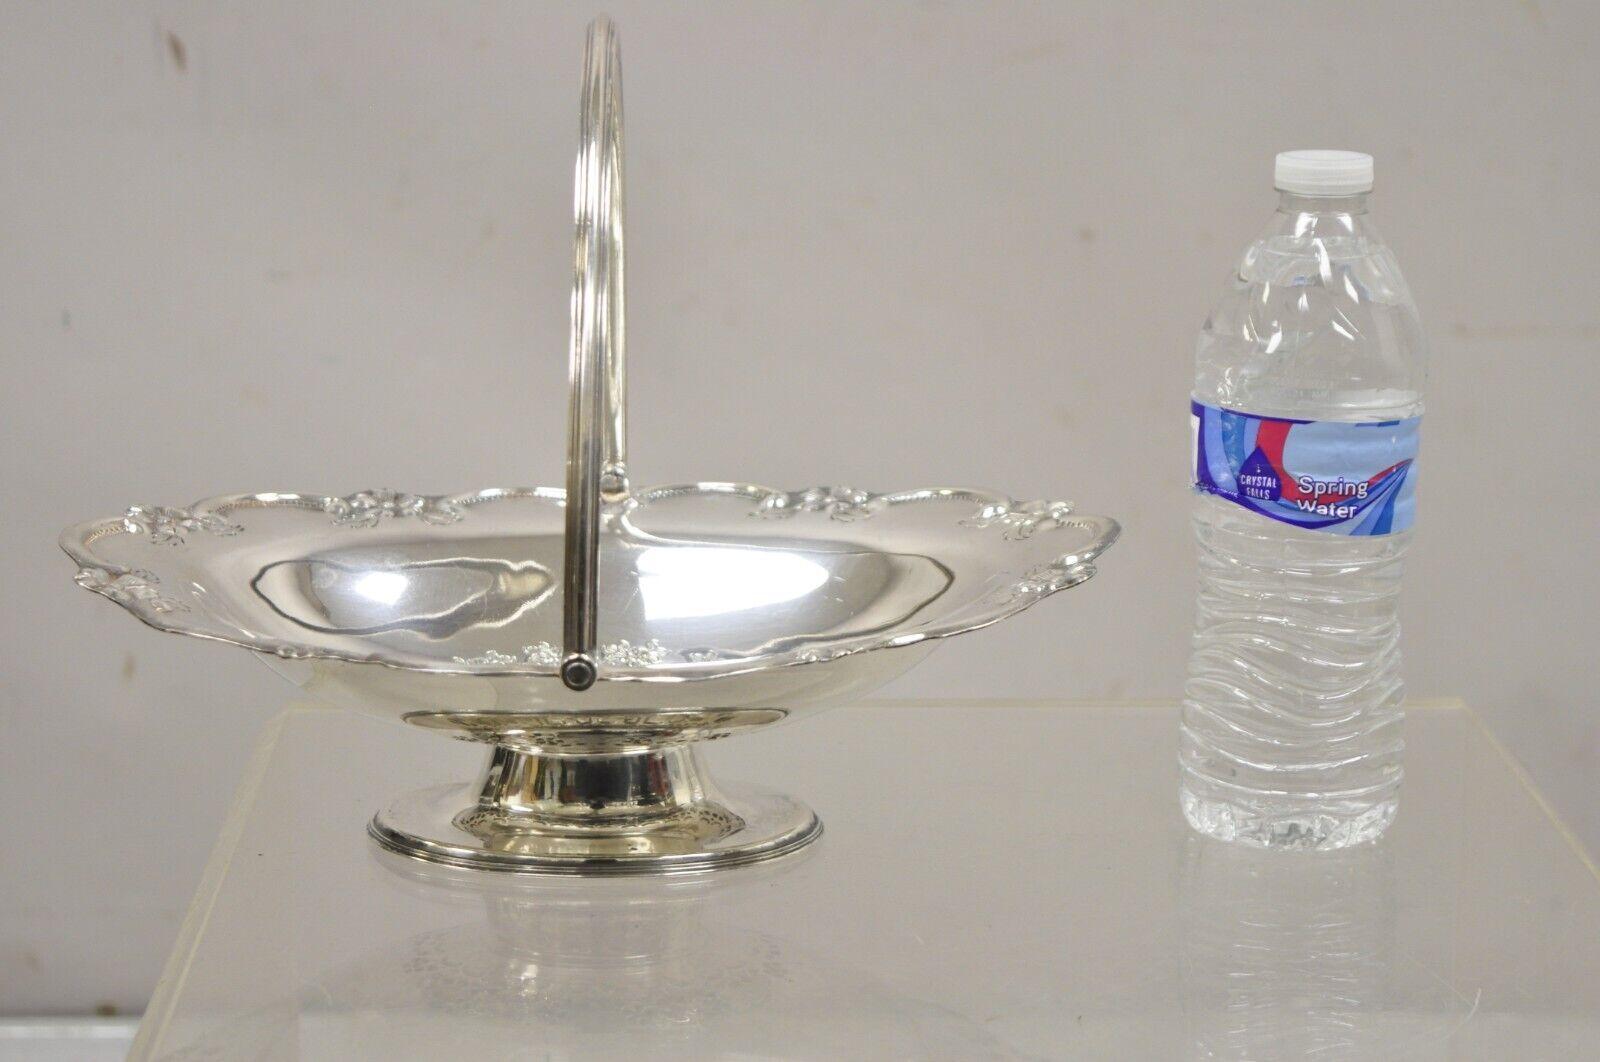 Antique L & WS English Victorian Silver Plated Footed Fruit Bread Basket with Handle. Circa Mid 20th Century.
Measurements:  3.5